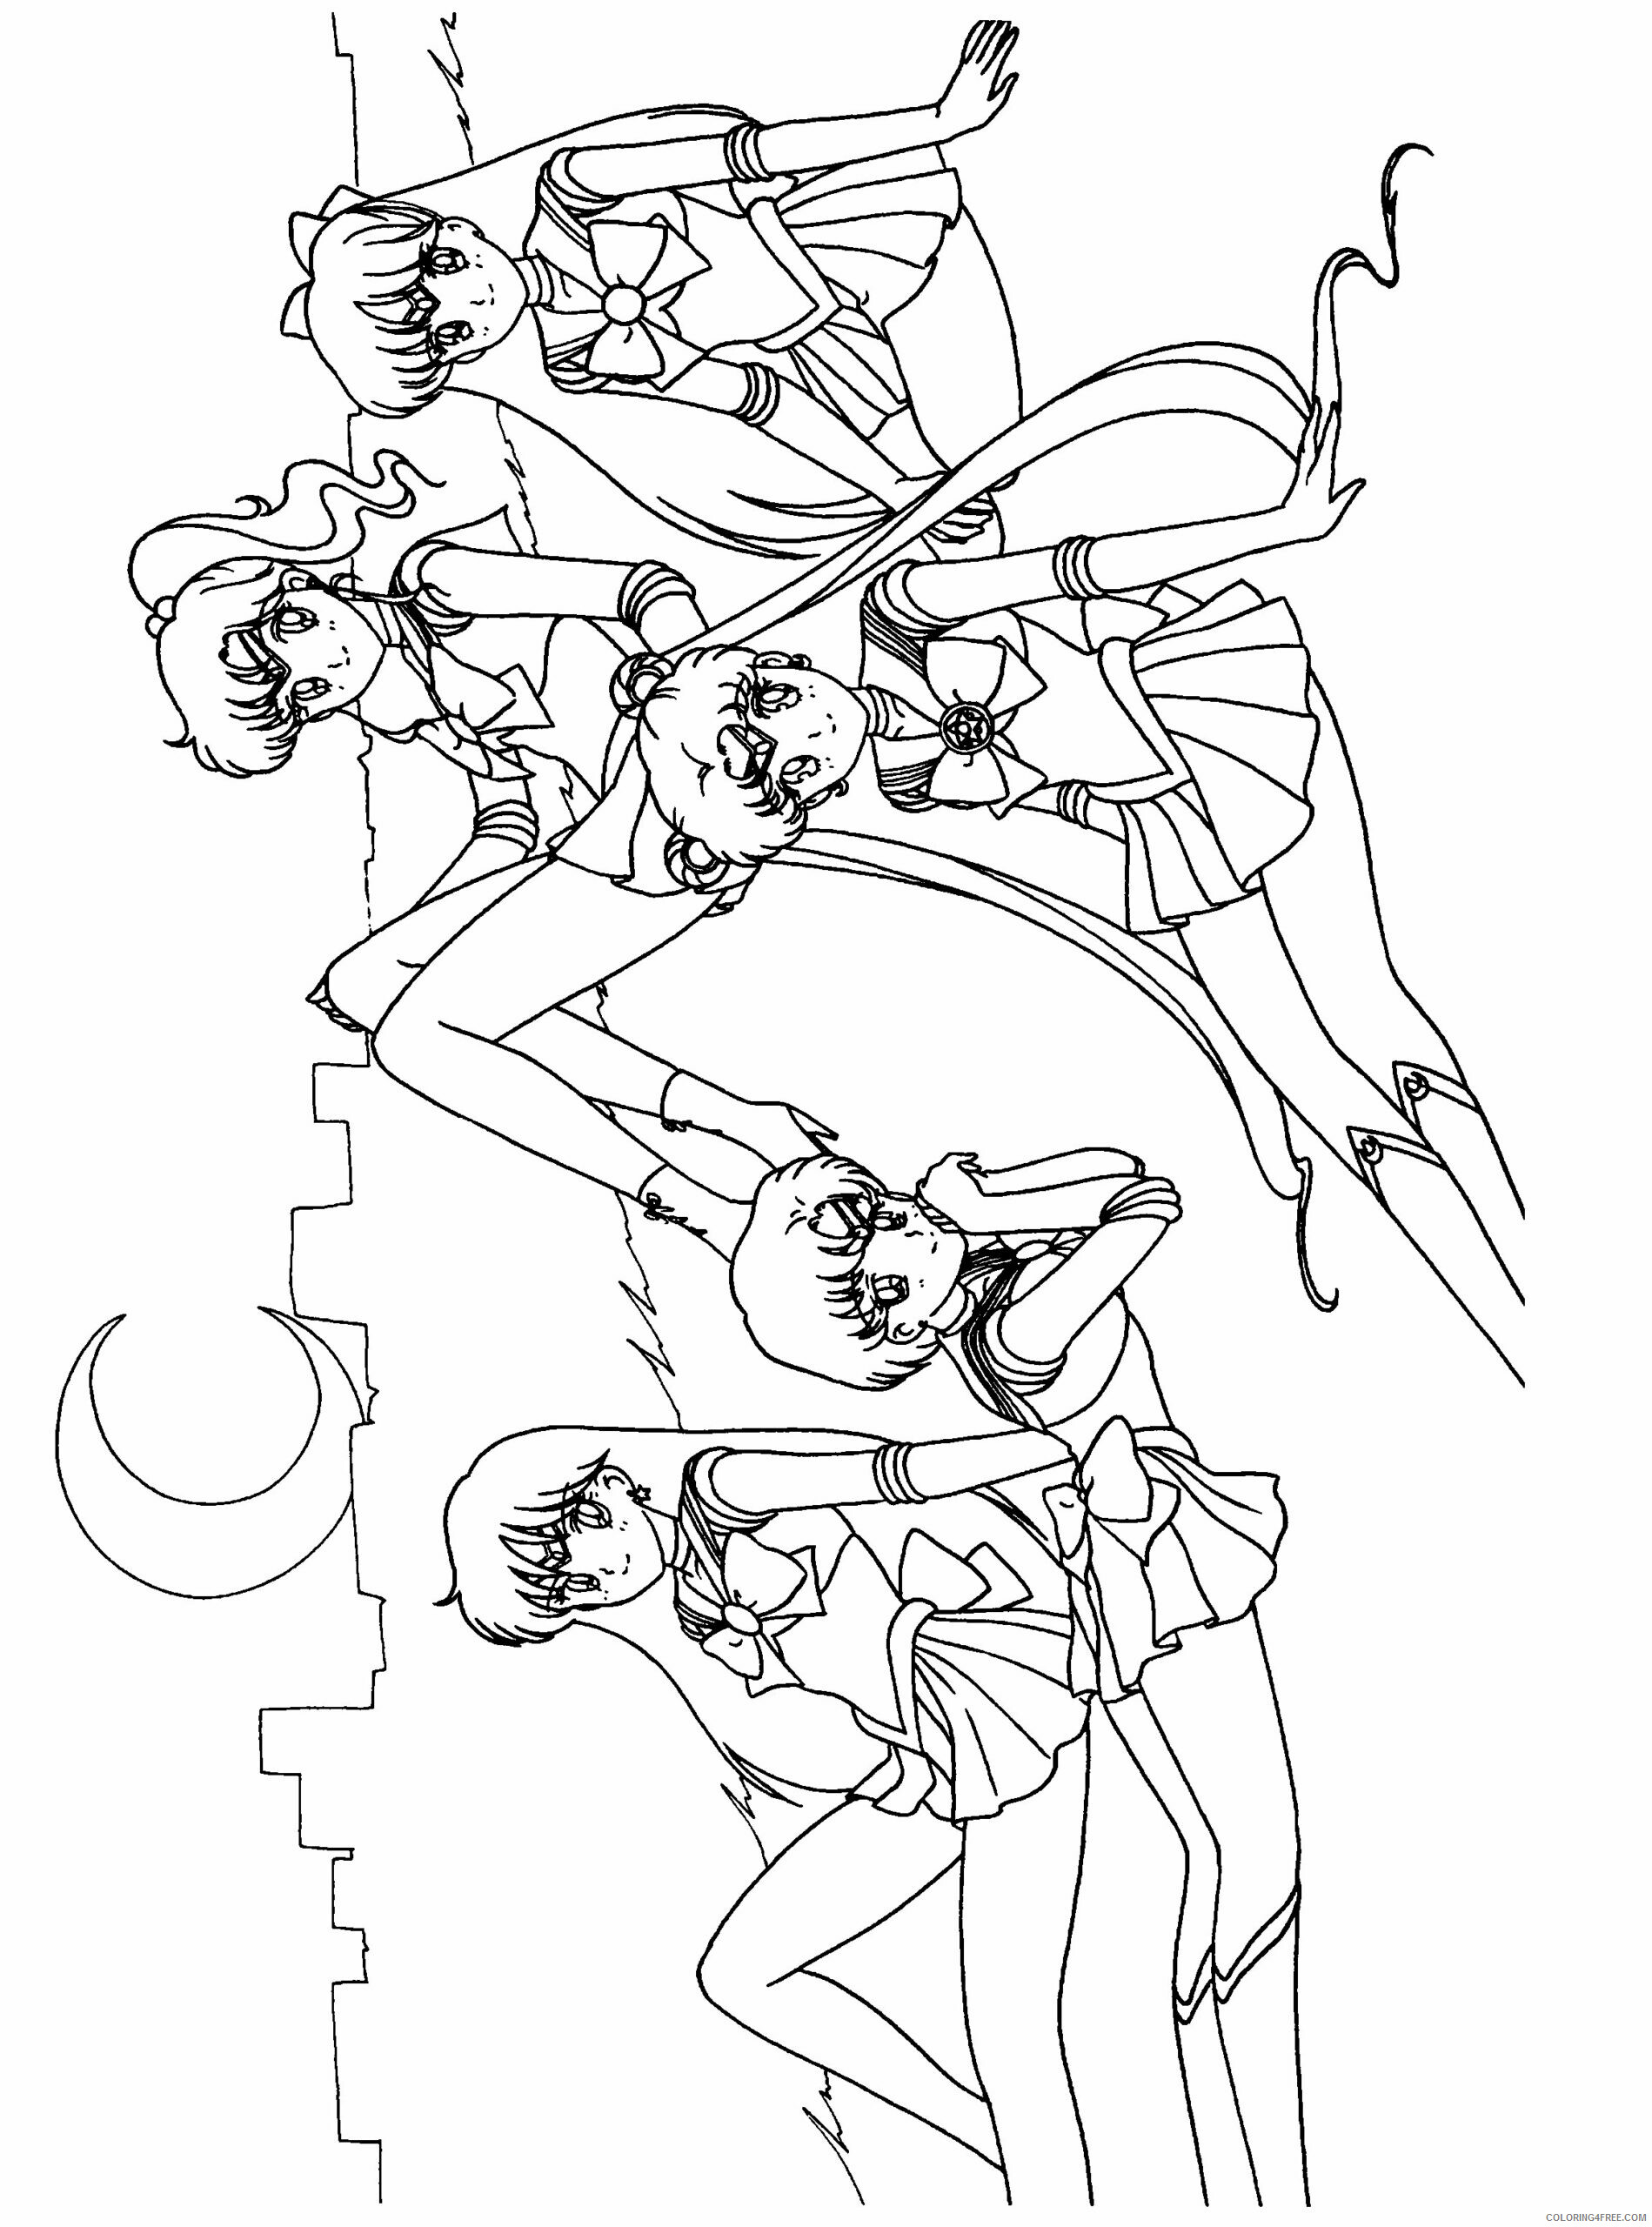 Sailor Moon Printable Coloring Pages Anime sailormoon GlKBx 2 2021 0987 Coloring4free